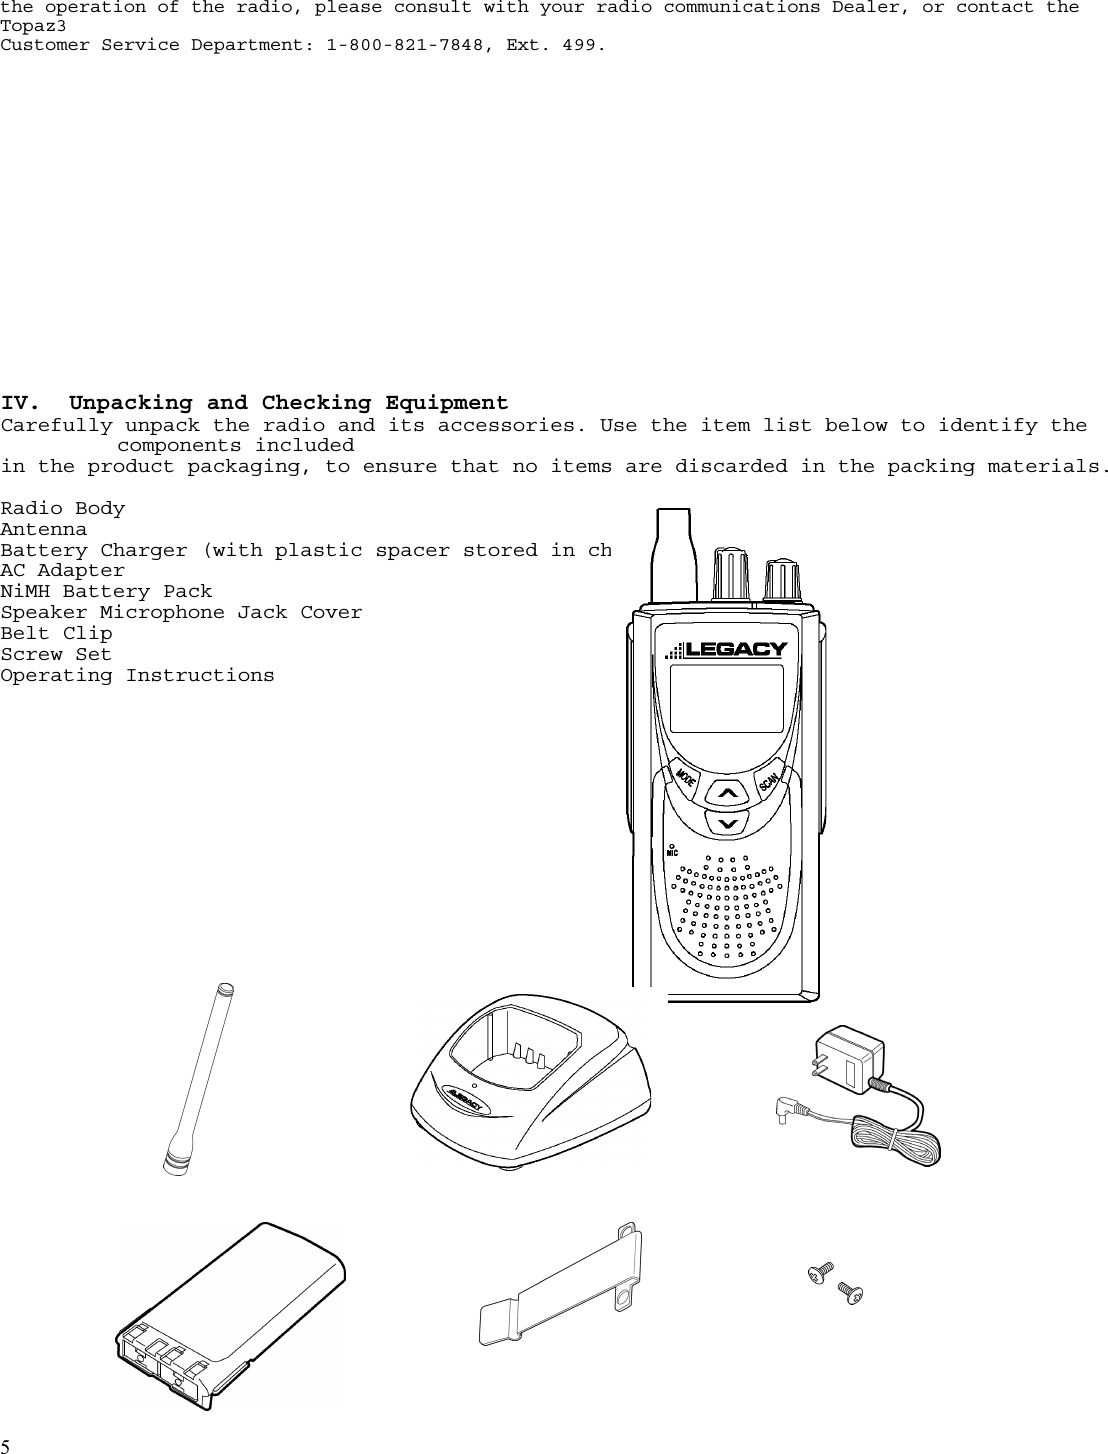  5  the operation of the radio, please consult with your radio communications Dealer, or contact the Topaz3  Customer Service Department: 1-800-821-7848, Ext. 499.                   IV.  Unpacking and Checking Equipment Carefully unpack the radio and its accessories. Use the item list below to identify the components included  in the product packaging, to ensure that no items are discarded in the packing materials.   Radio Body Antenna    Battery Charger (with plastic spacer stored in charger base) AC Adapter    NiMH Battery Pack    Speaker Microphone Jack Cover  Belt Clip Screw Set     Operating Instructions                                          